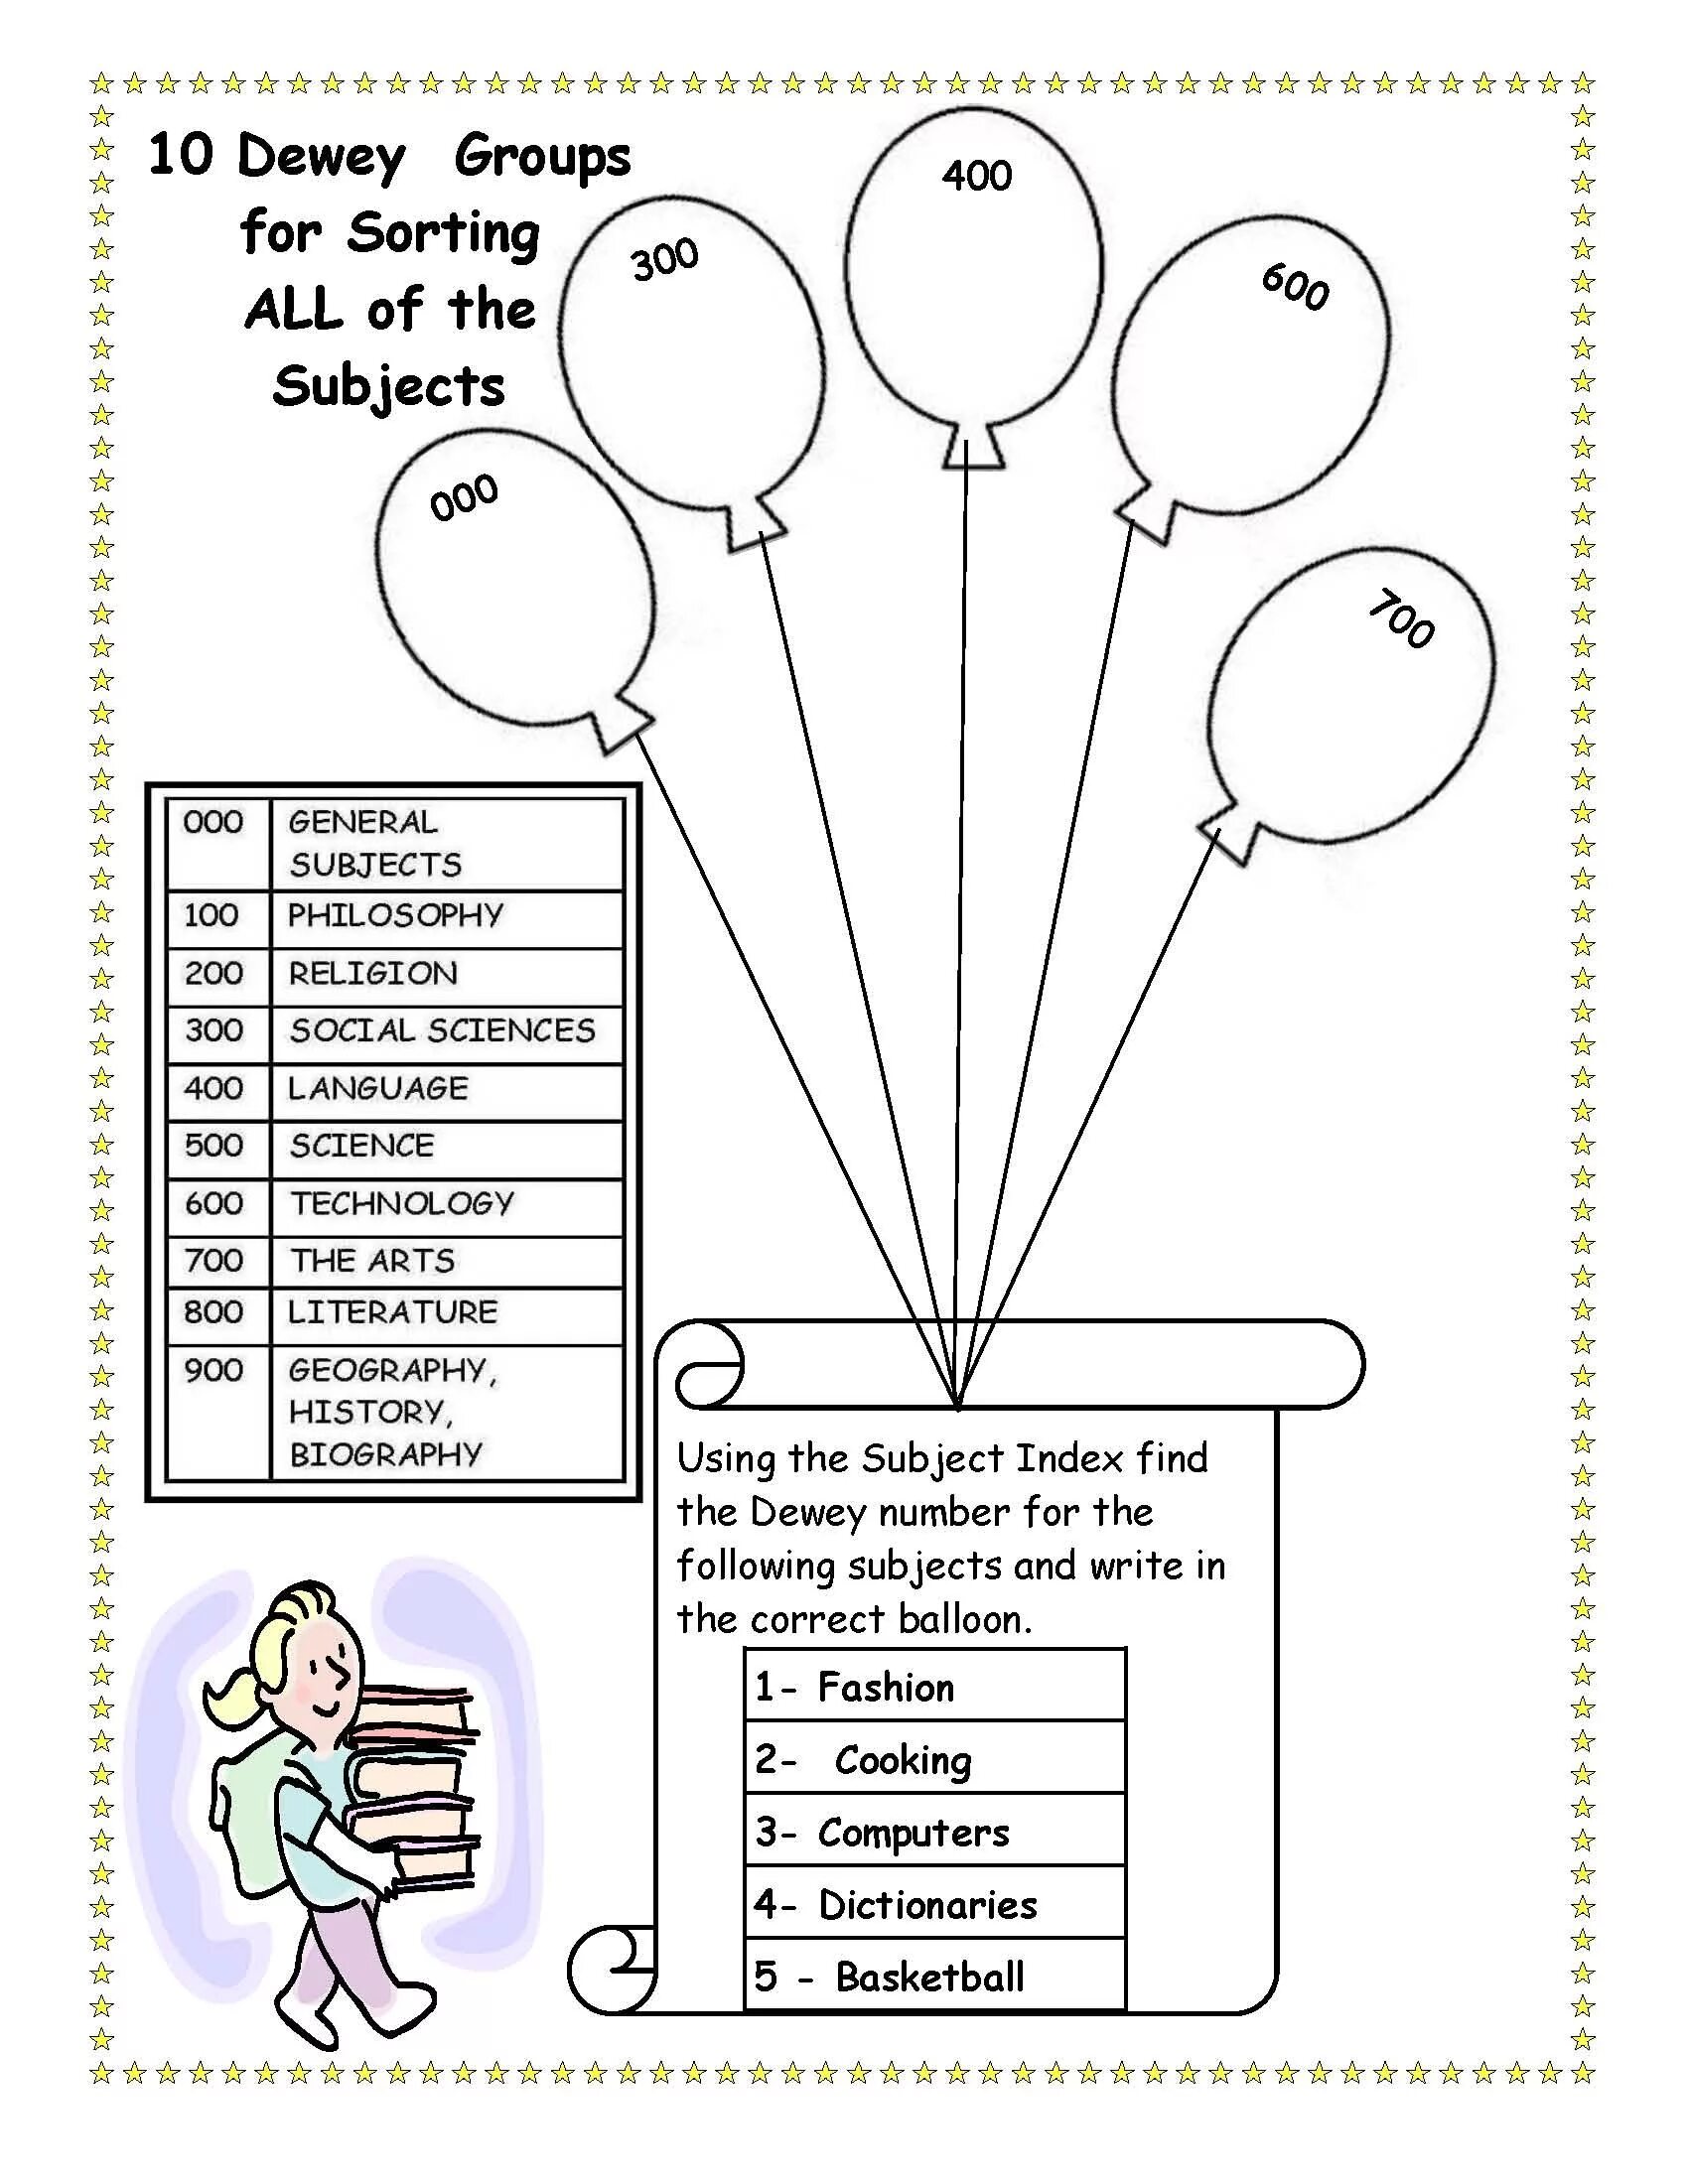 Library Worksheets. Biography Worksheets. The big Balloon Worksheet. Broccoli Balloon Worksheets.